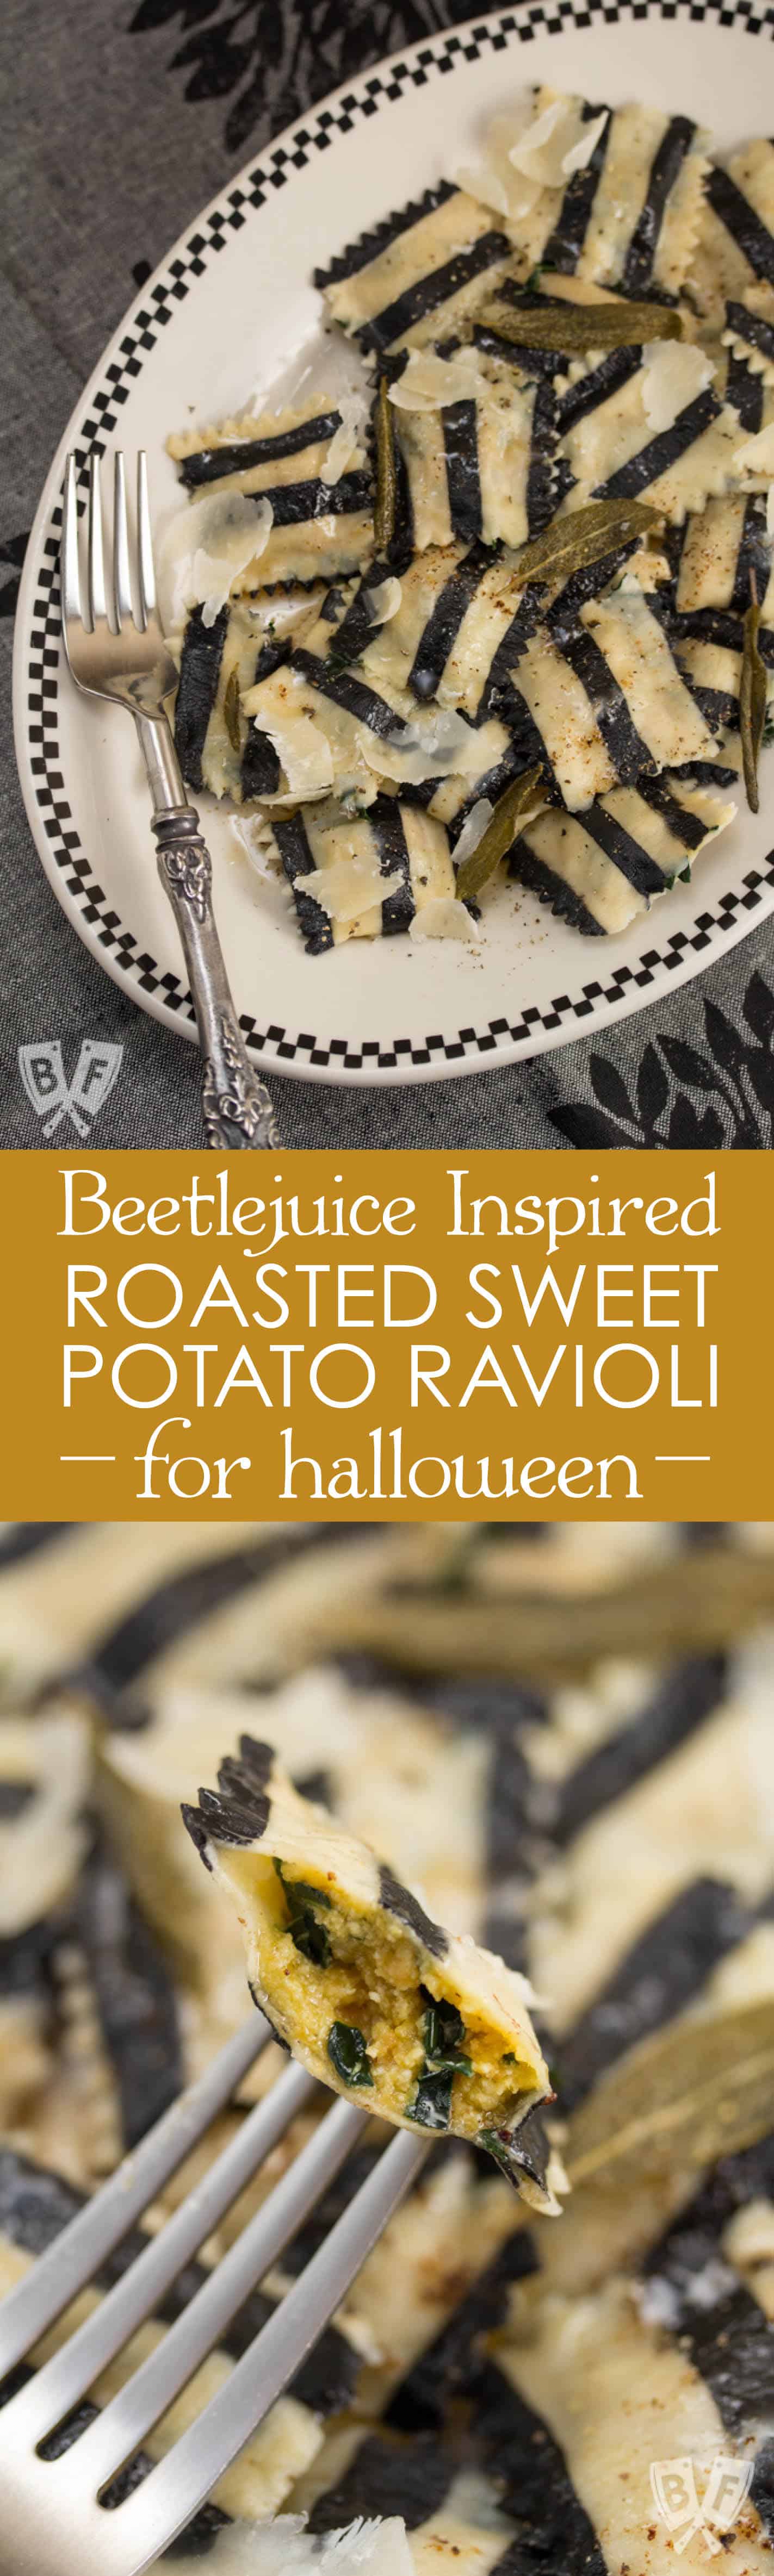 Ghost with the Most Roasted Sweet Potato Ravioli: Homemade black + white pasta is stuffed with roasted veggies, topped with brown butter sauce & crispy sage leaves in my Halloween tribute to Beetlejuice!